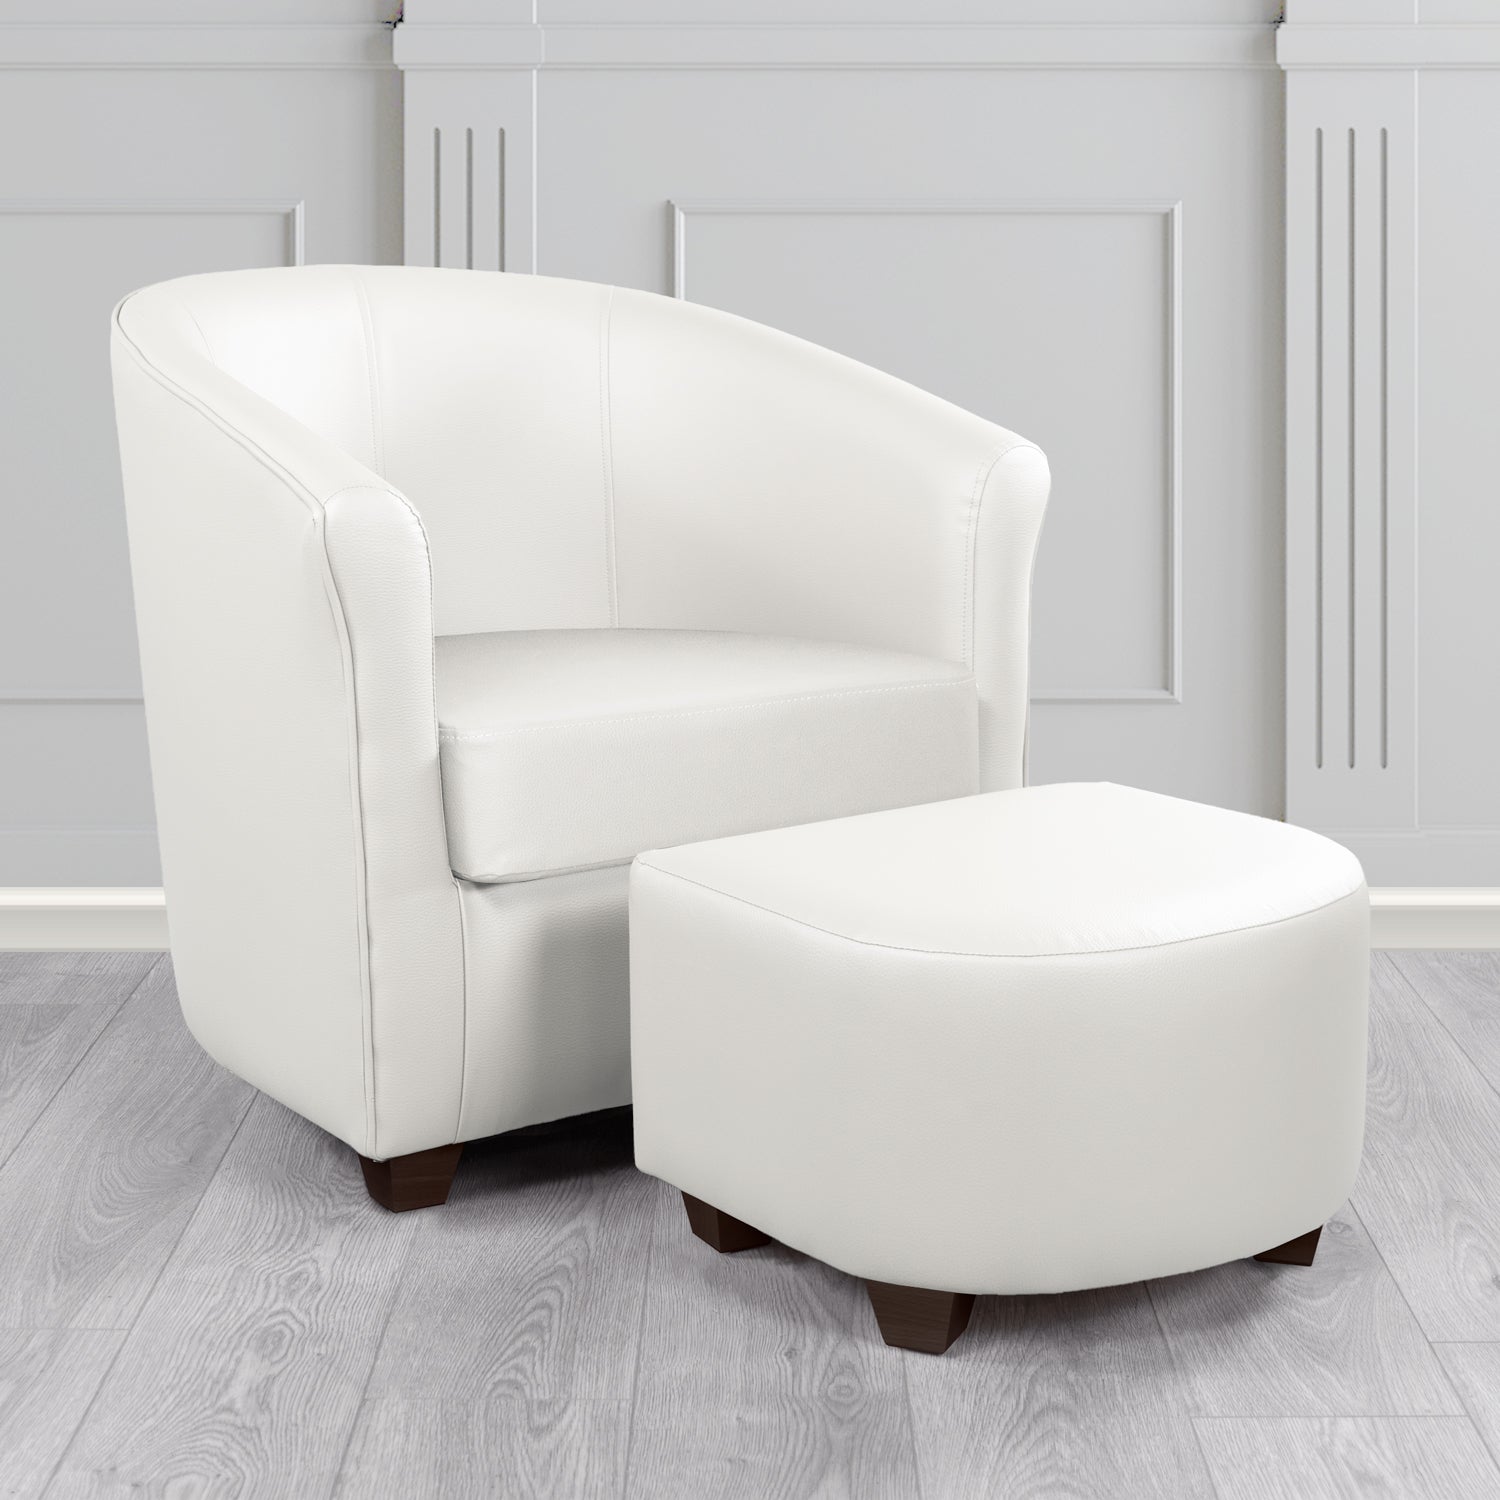 Cannes Tub Chair with Footstool Set in Just Colour Jasmine White Crib 5 Faux Leather - The Tub Chair Shop